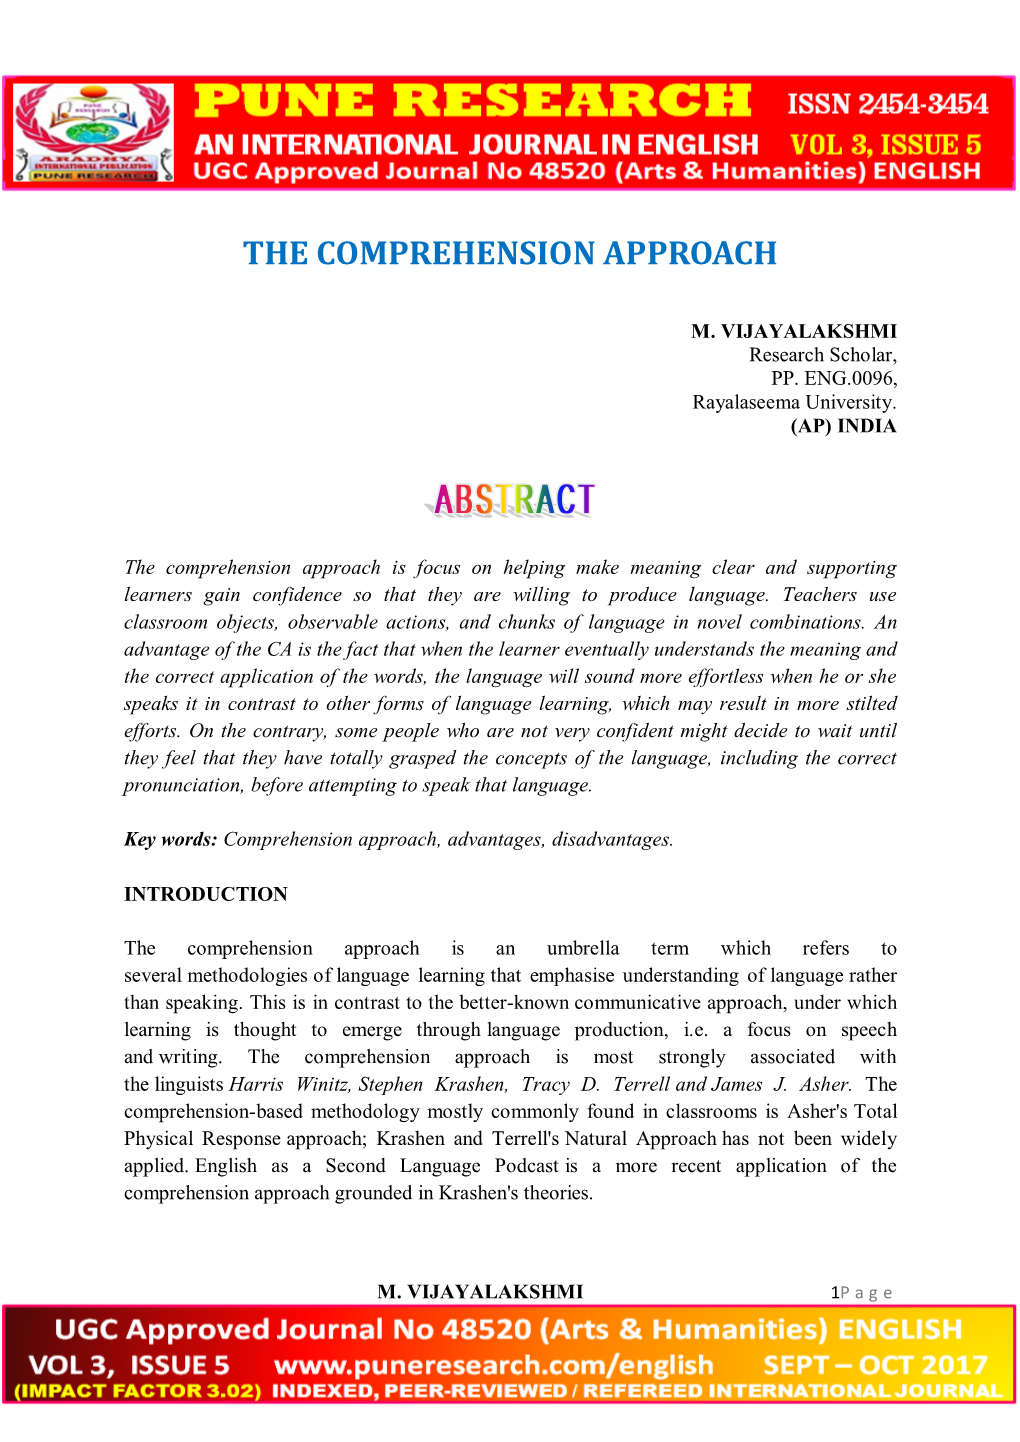 The Comprehension Approach